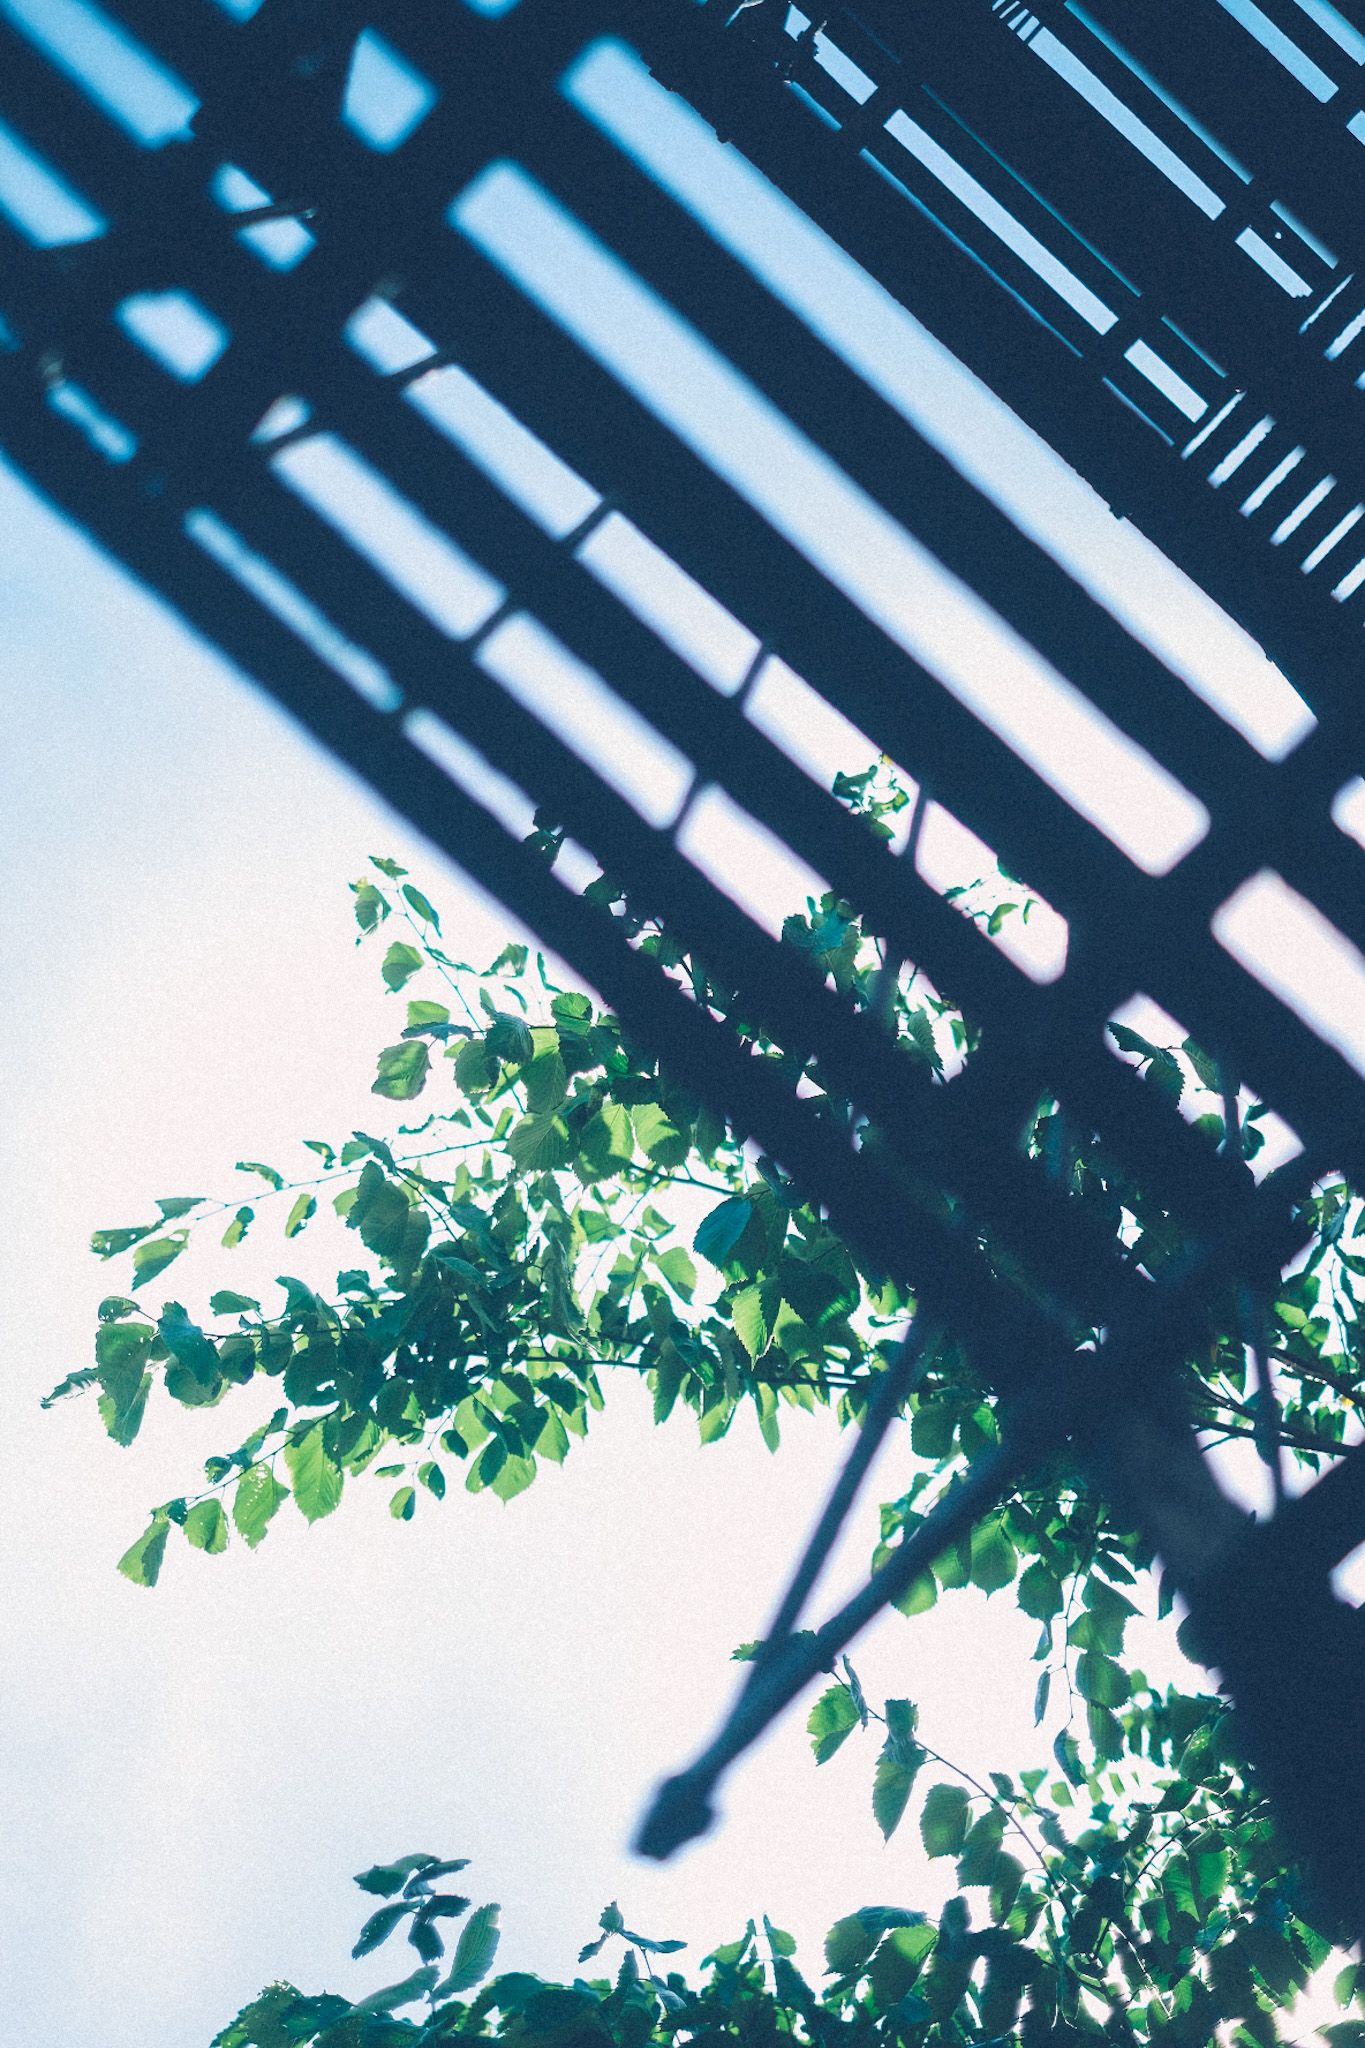 The sky is light blue, with green tree leaves spreading out behind the black painter slats of a fire escape.